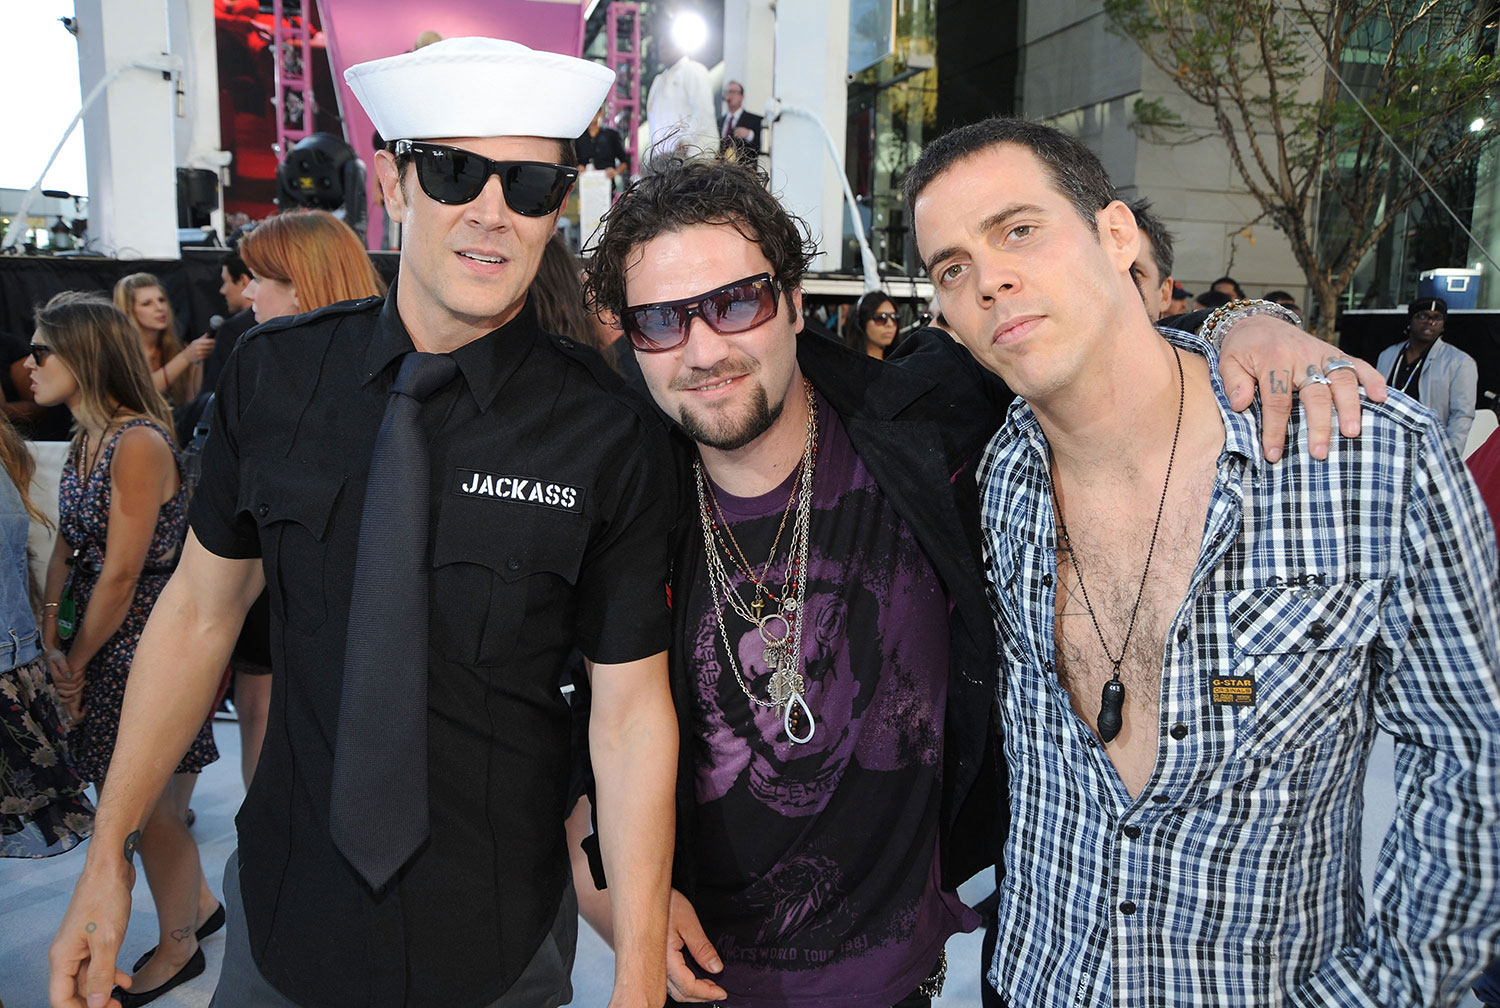 LOS ANGELES, CA - SEPTEMBER 12: (L-R) TV personalities Johnny Knoxville, Bam Margera, and Steve-O arrive at the 2010 MTV Video Music Awards held at Nokia Theatre L.A. Live on September 12, 2010 in Los Angeles, California. (Photo by Jeff Kravitz/FilmMagic)